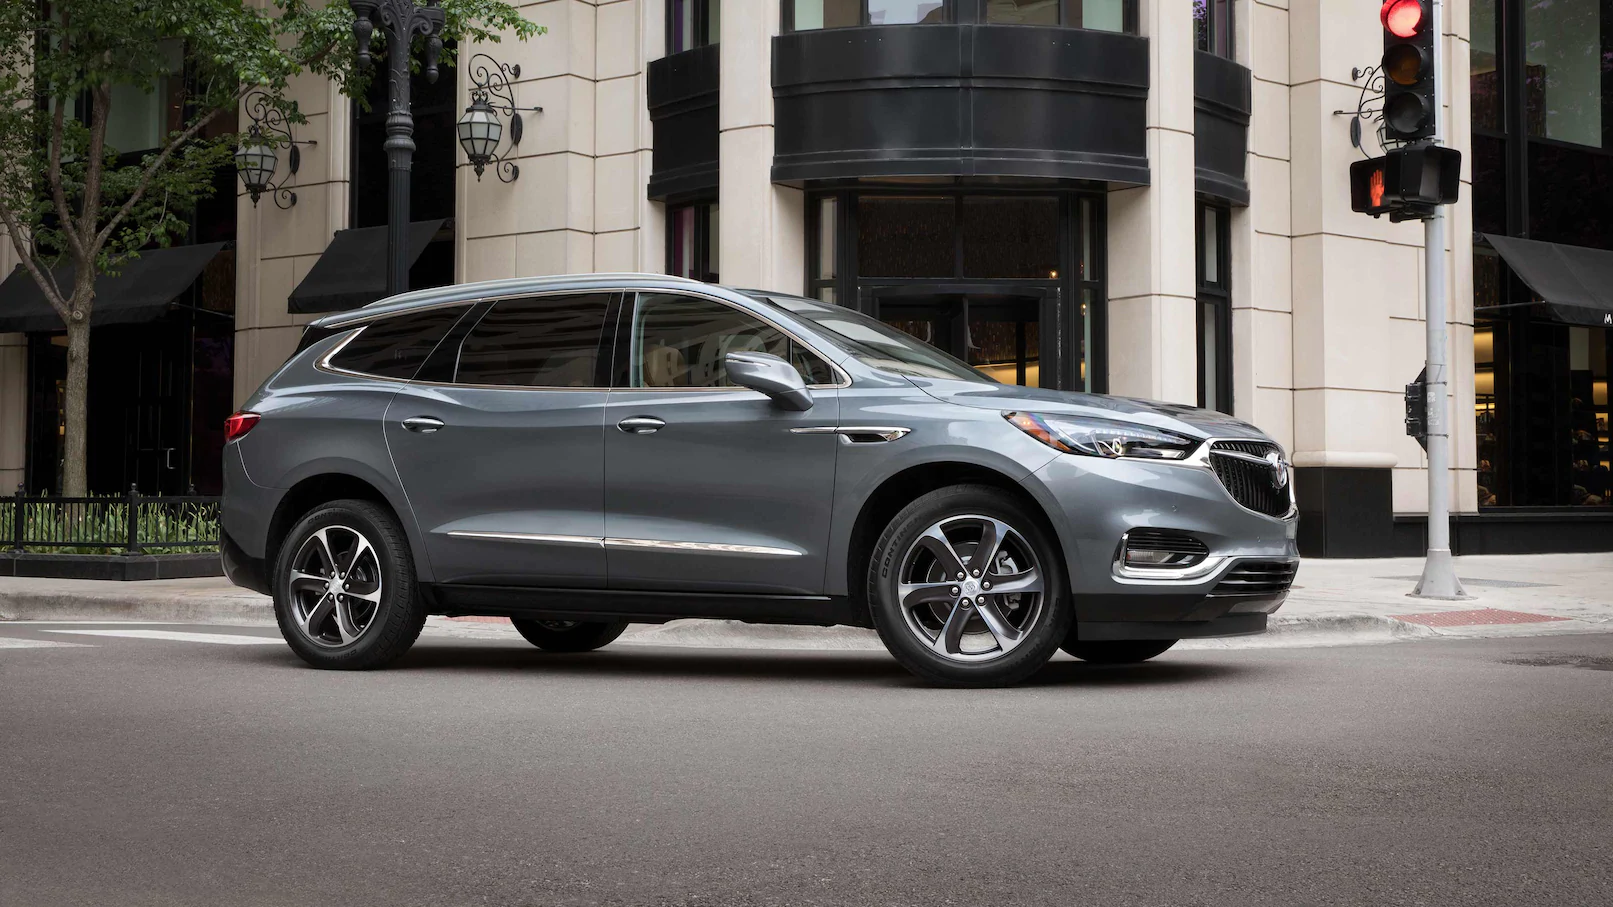 Is a Pre-Owned Buick Enclave Reliable?